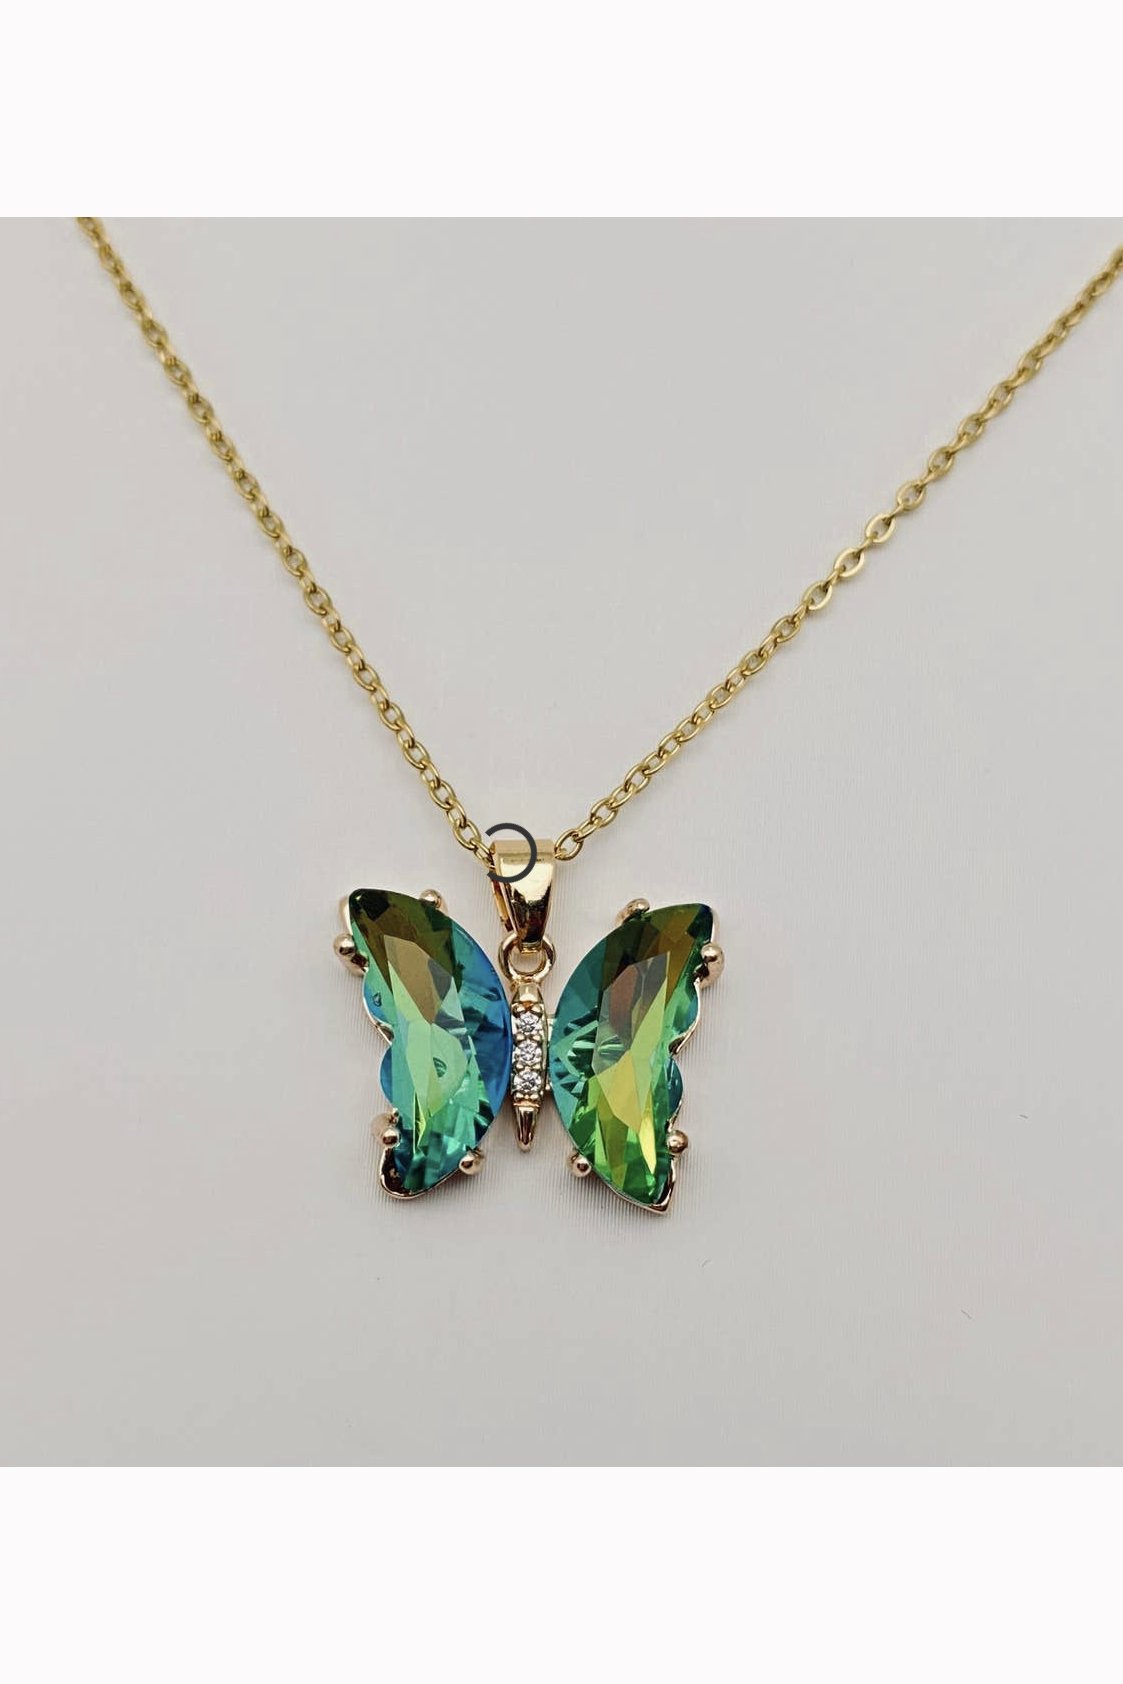 New .925 Sterling Silver Blue Green Butterfly Necklace - Etsy